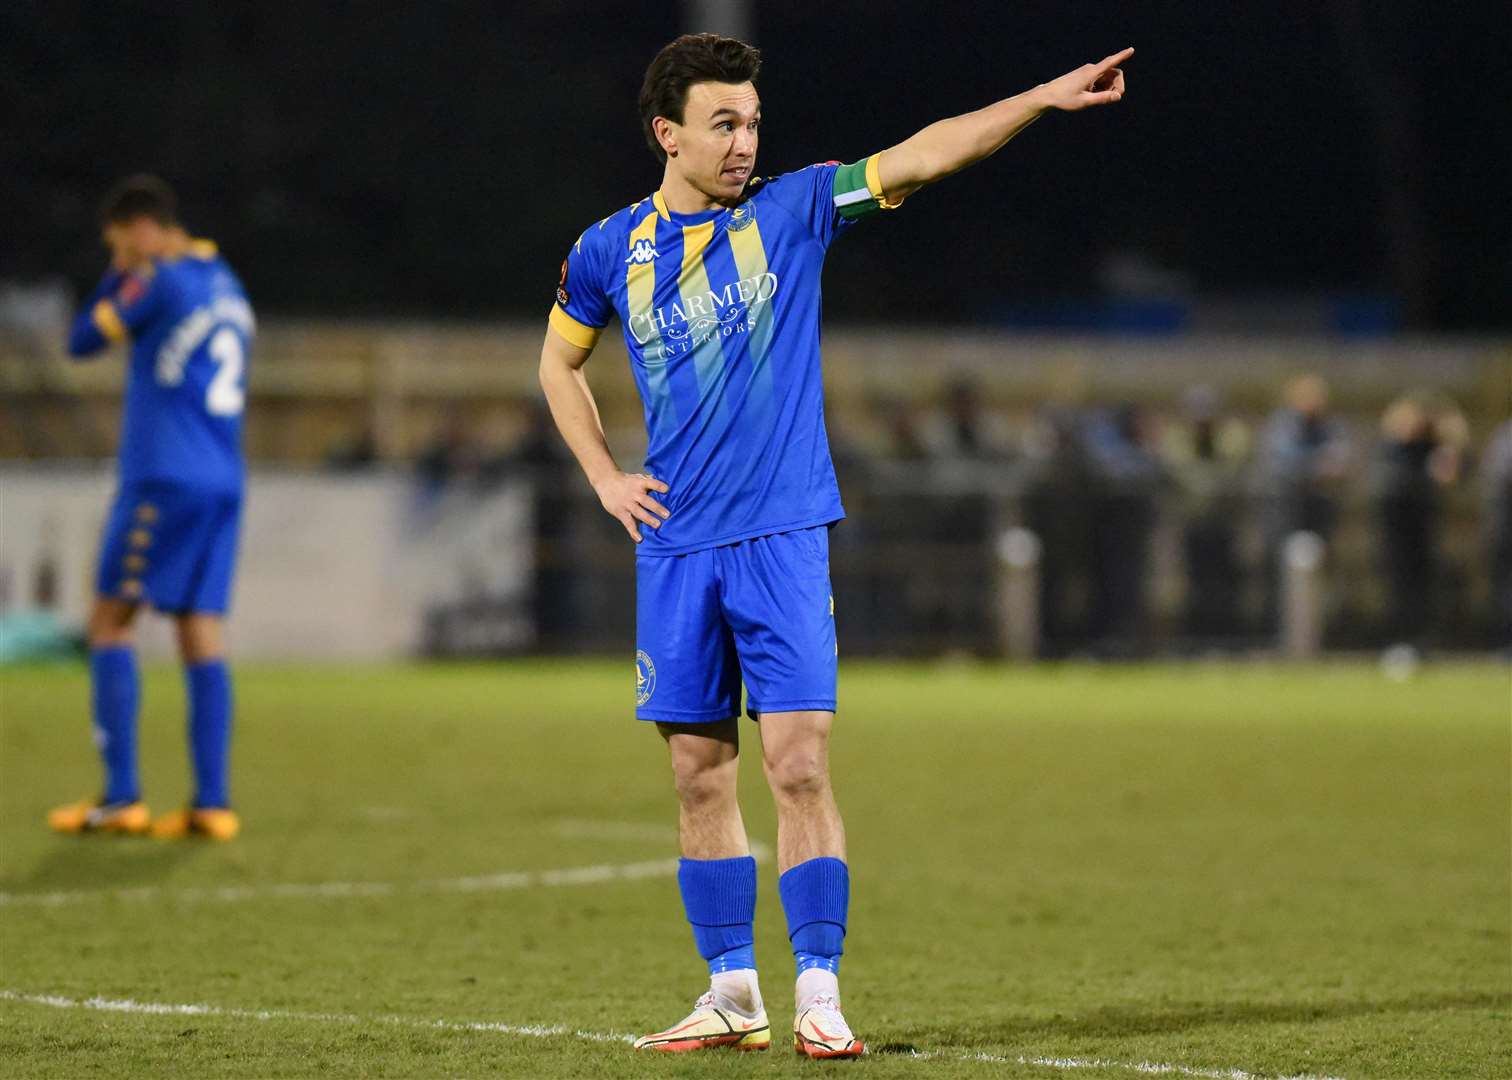 Michael Clunan who has left King's Lynn Town for Scunthorpe United